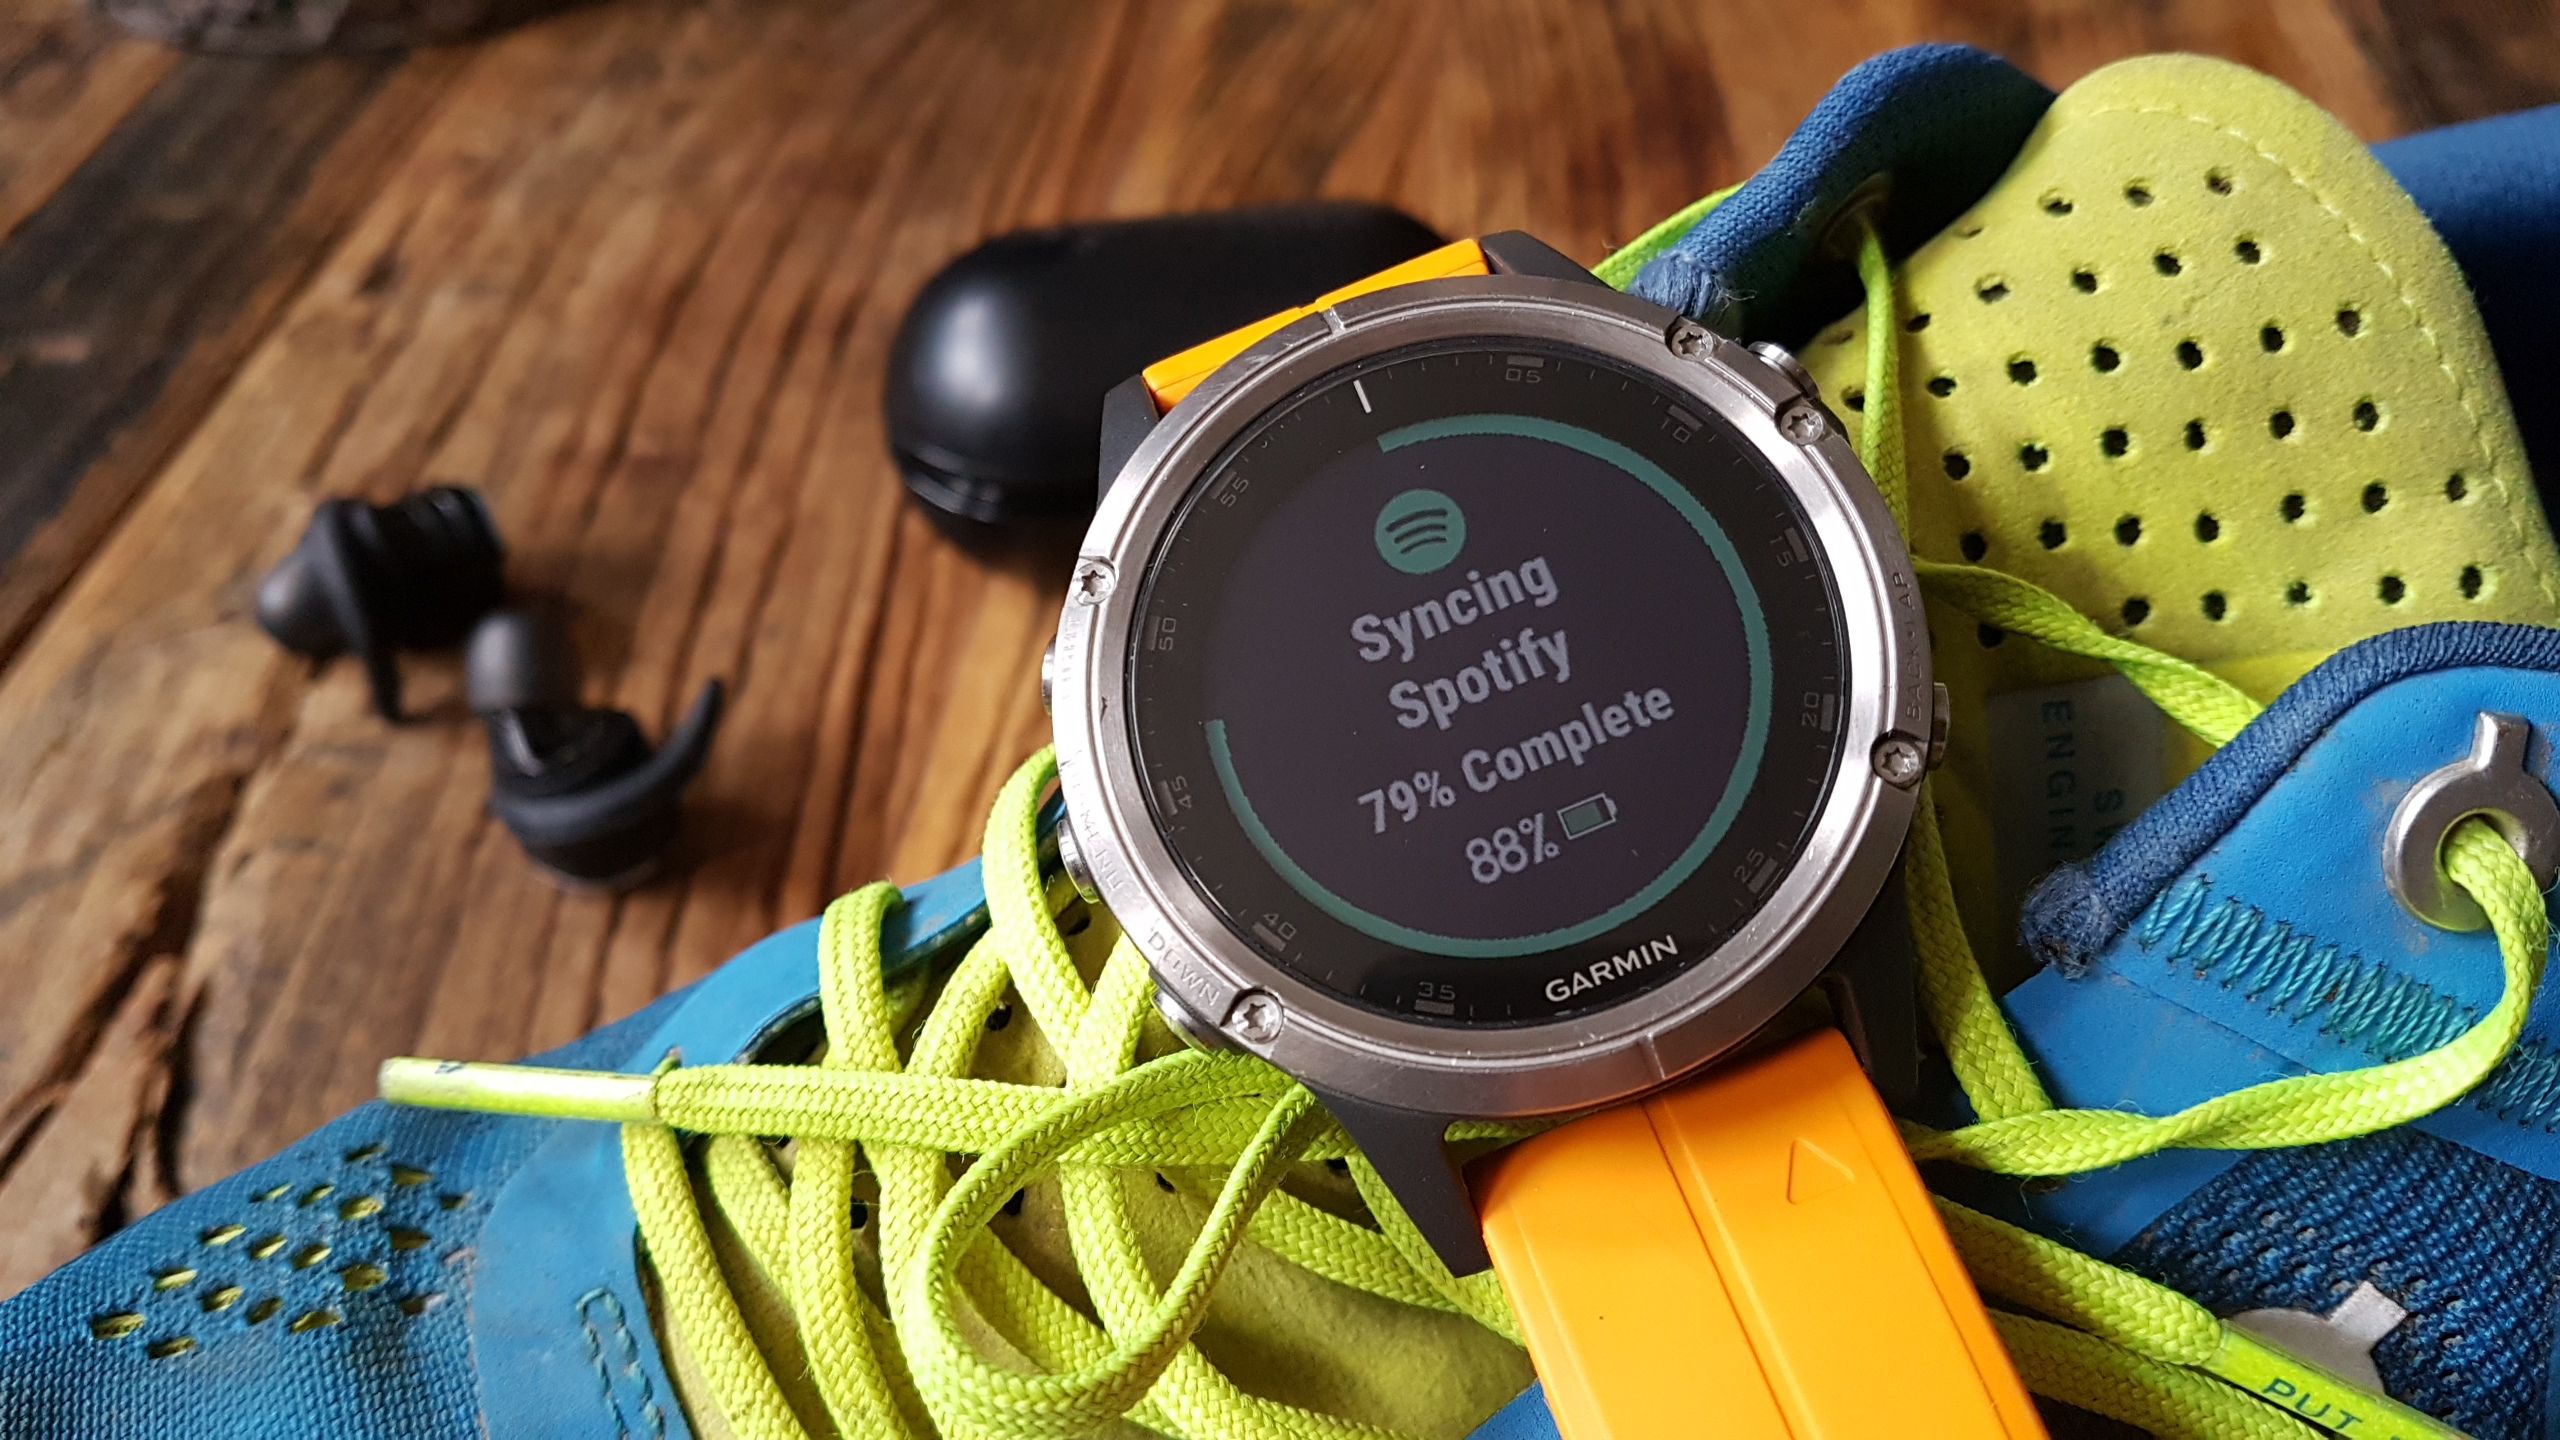 Spotify on Garmin 5 Plus: Our first impressions